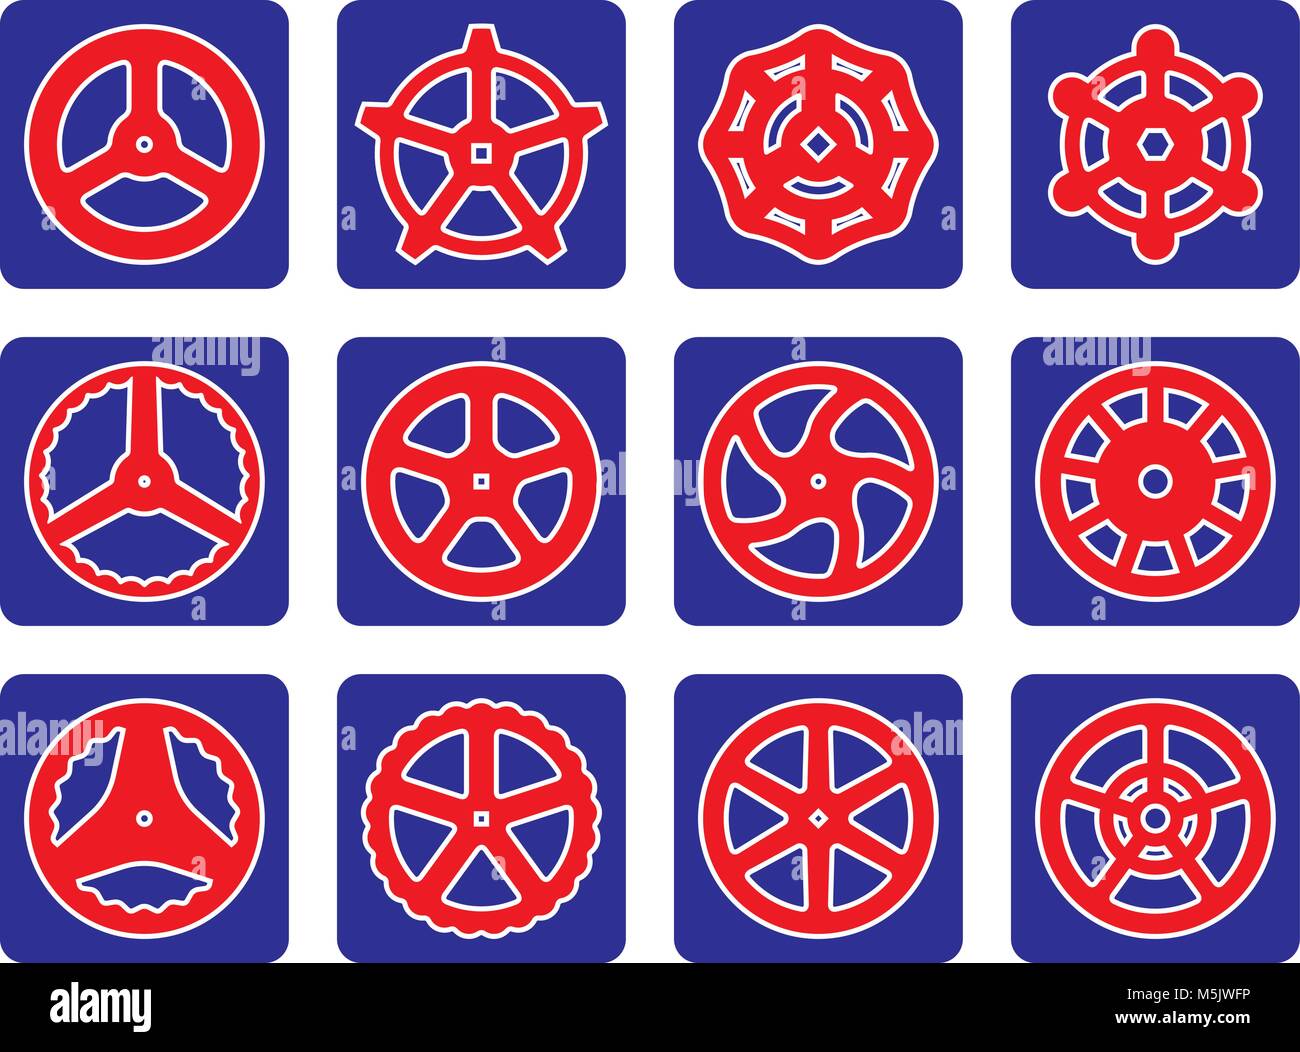 Hand wheel vector icon set on blue backgrounds. illustration of machinery equipment for adjustment and operation Stock Vector